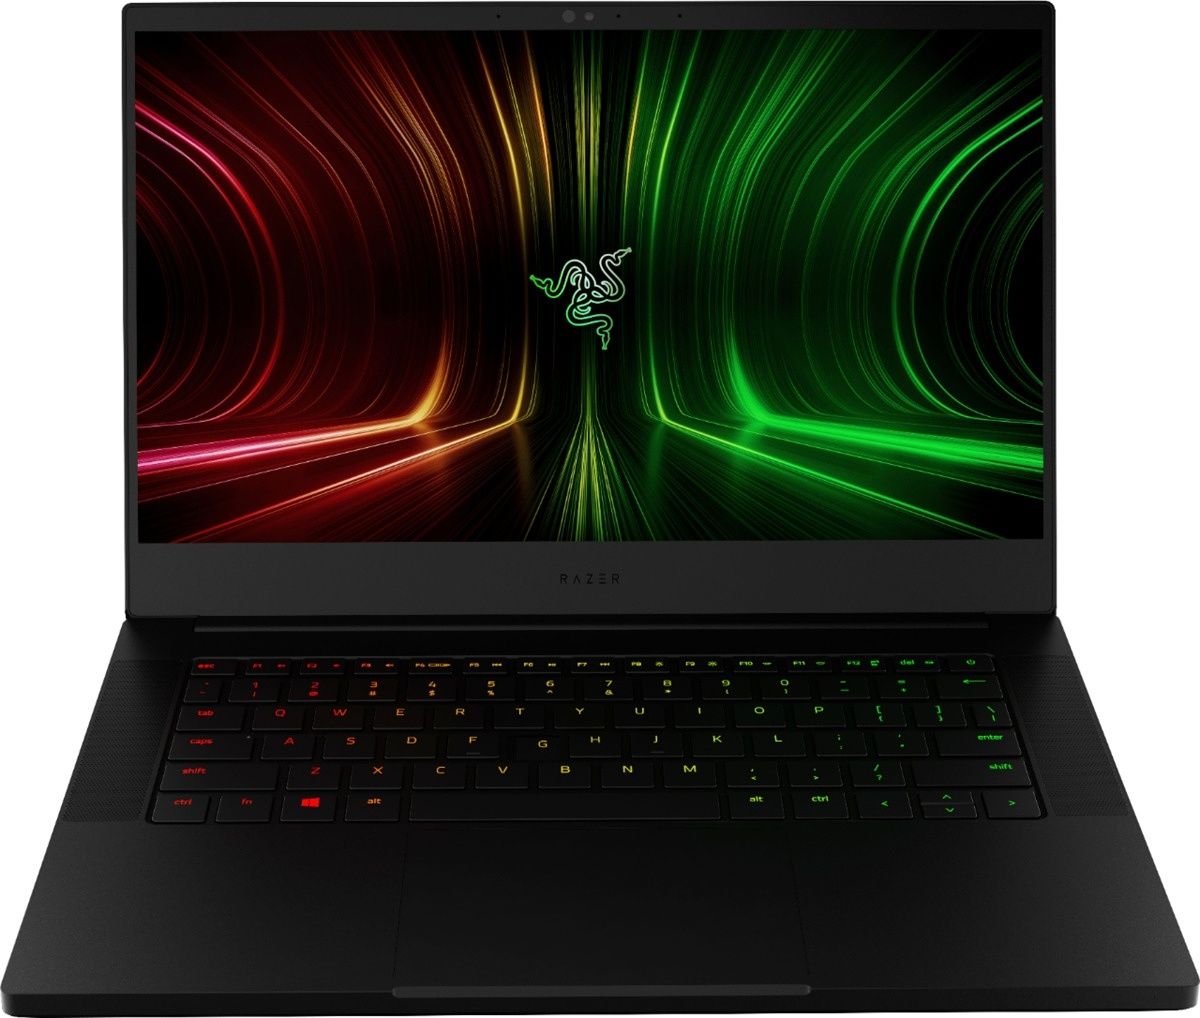 The Razer Blade 14 is a compact and powerful gaming laptop powered by AMD processors and NVIDIA RTX graphics.